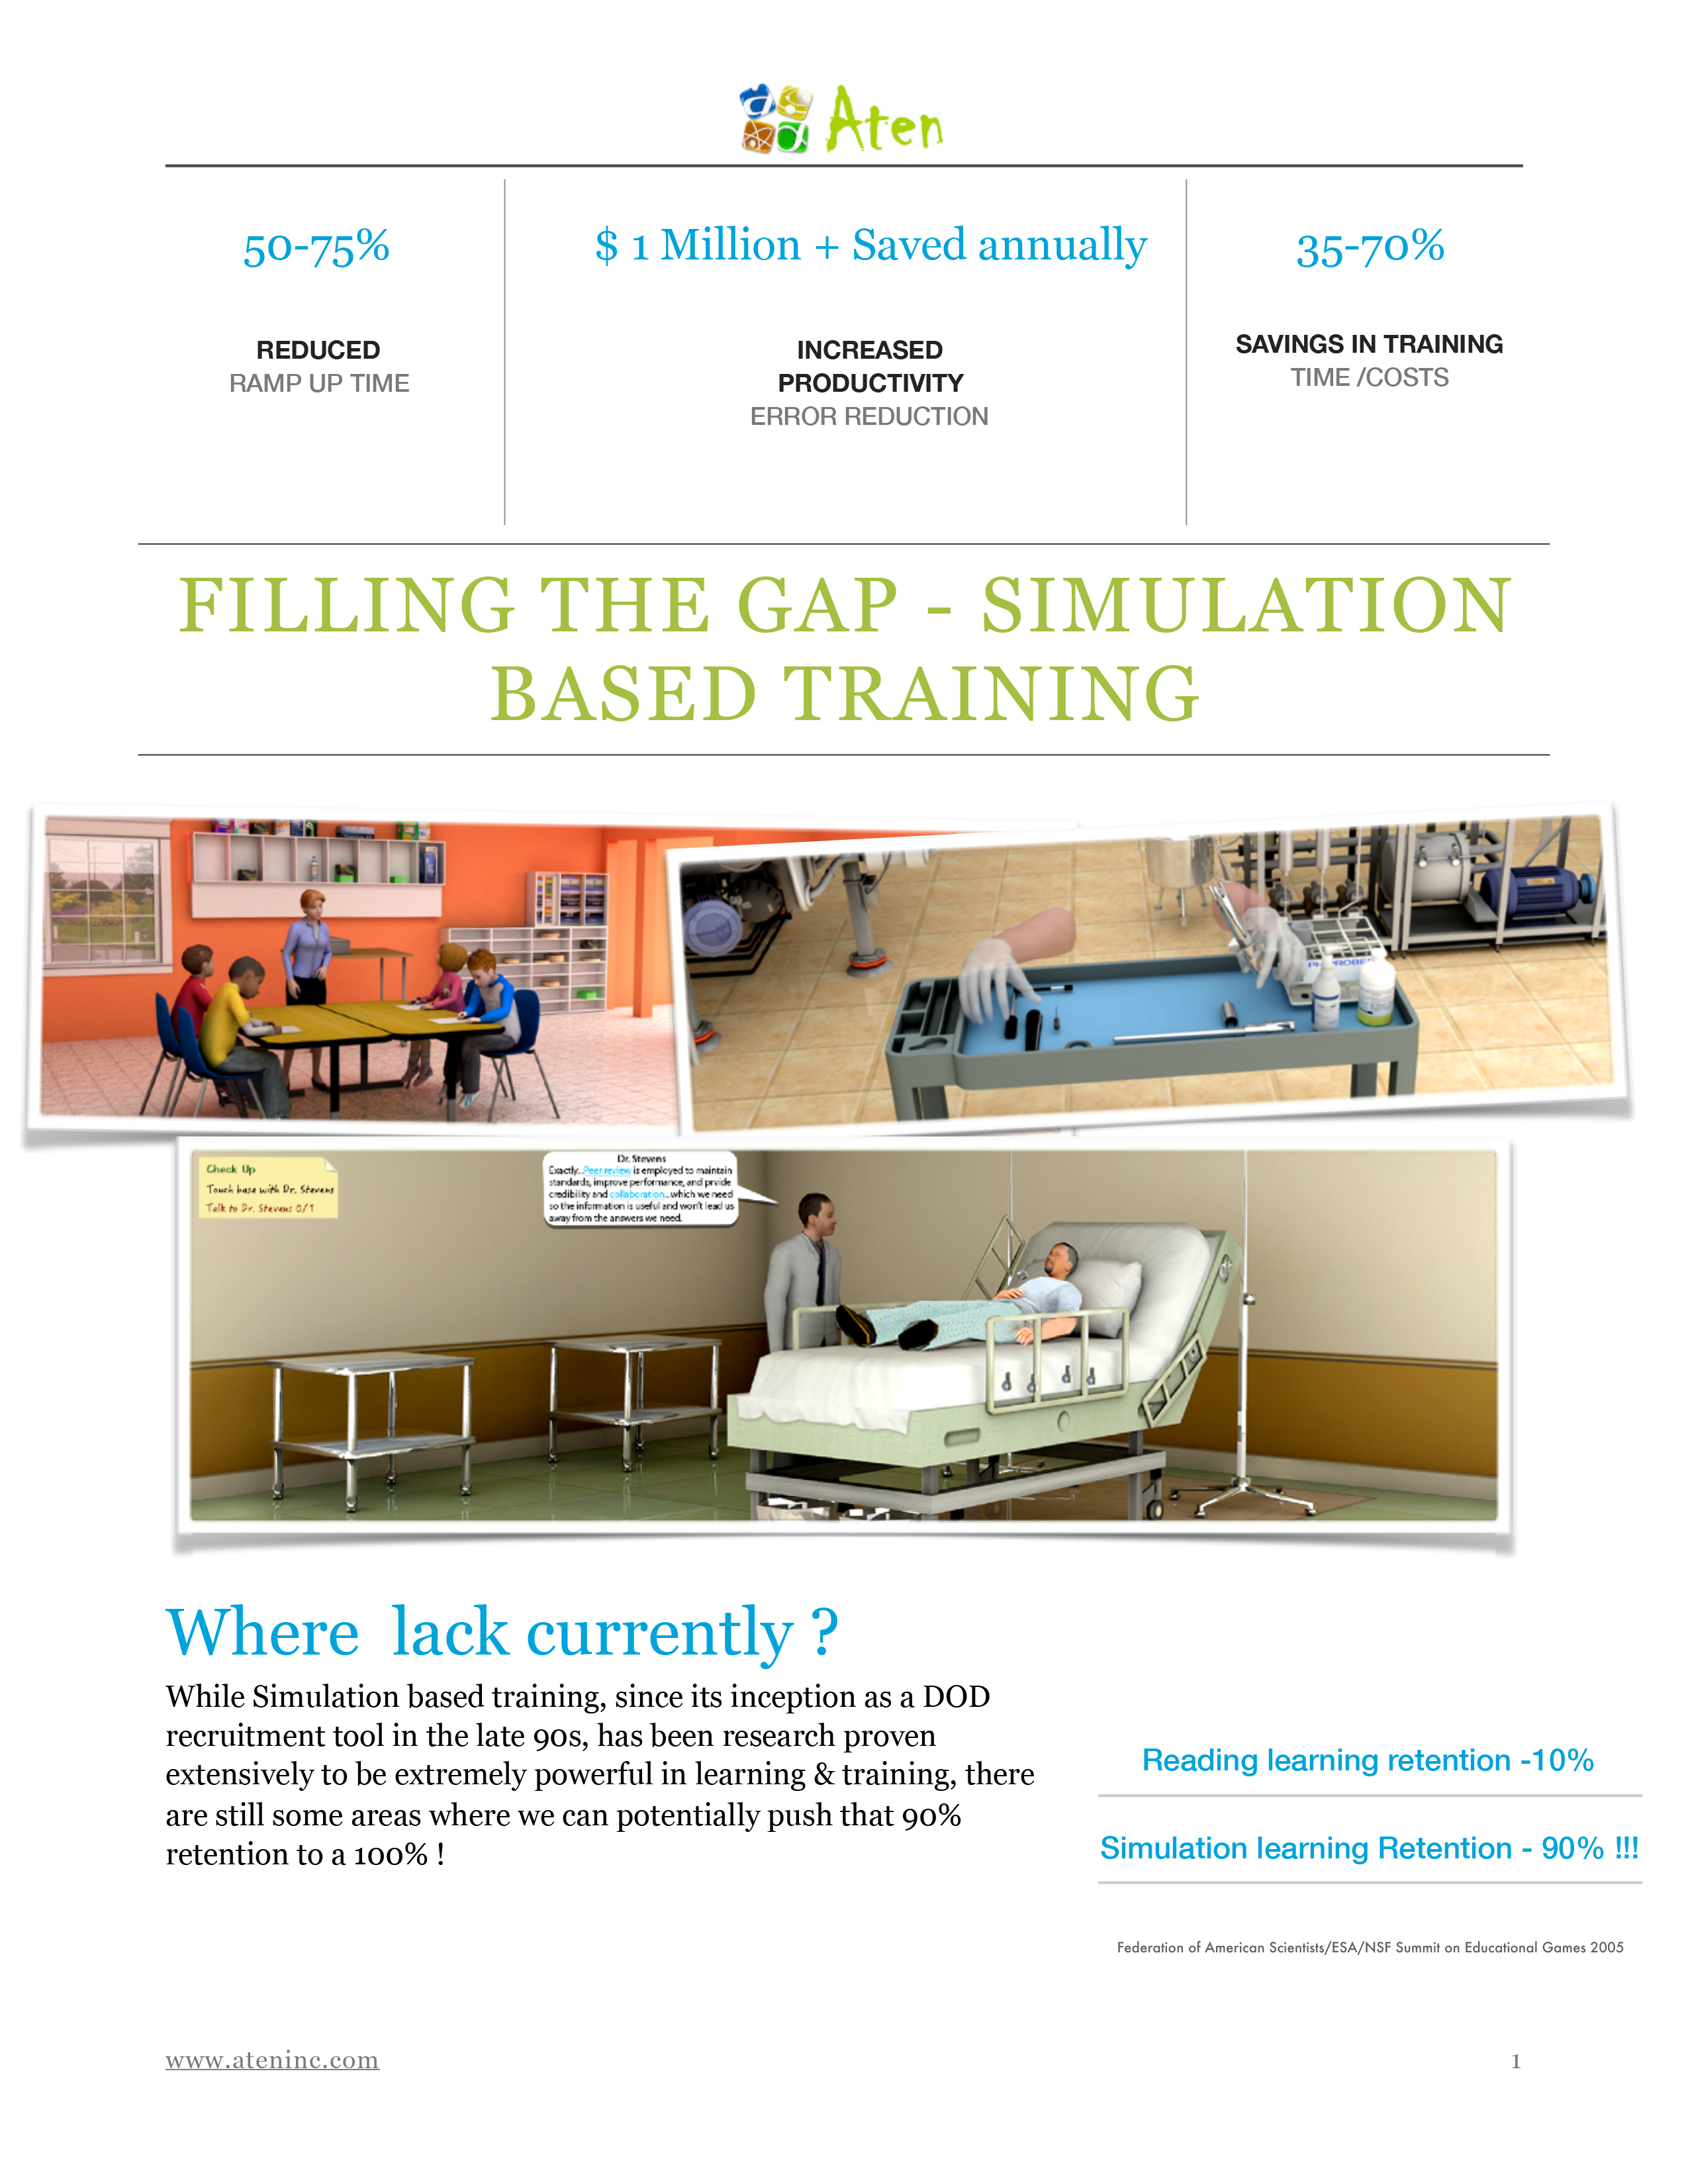 ATEN APPROACH - Filling the gap in simulation based training